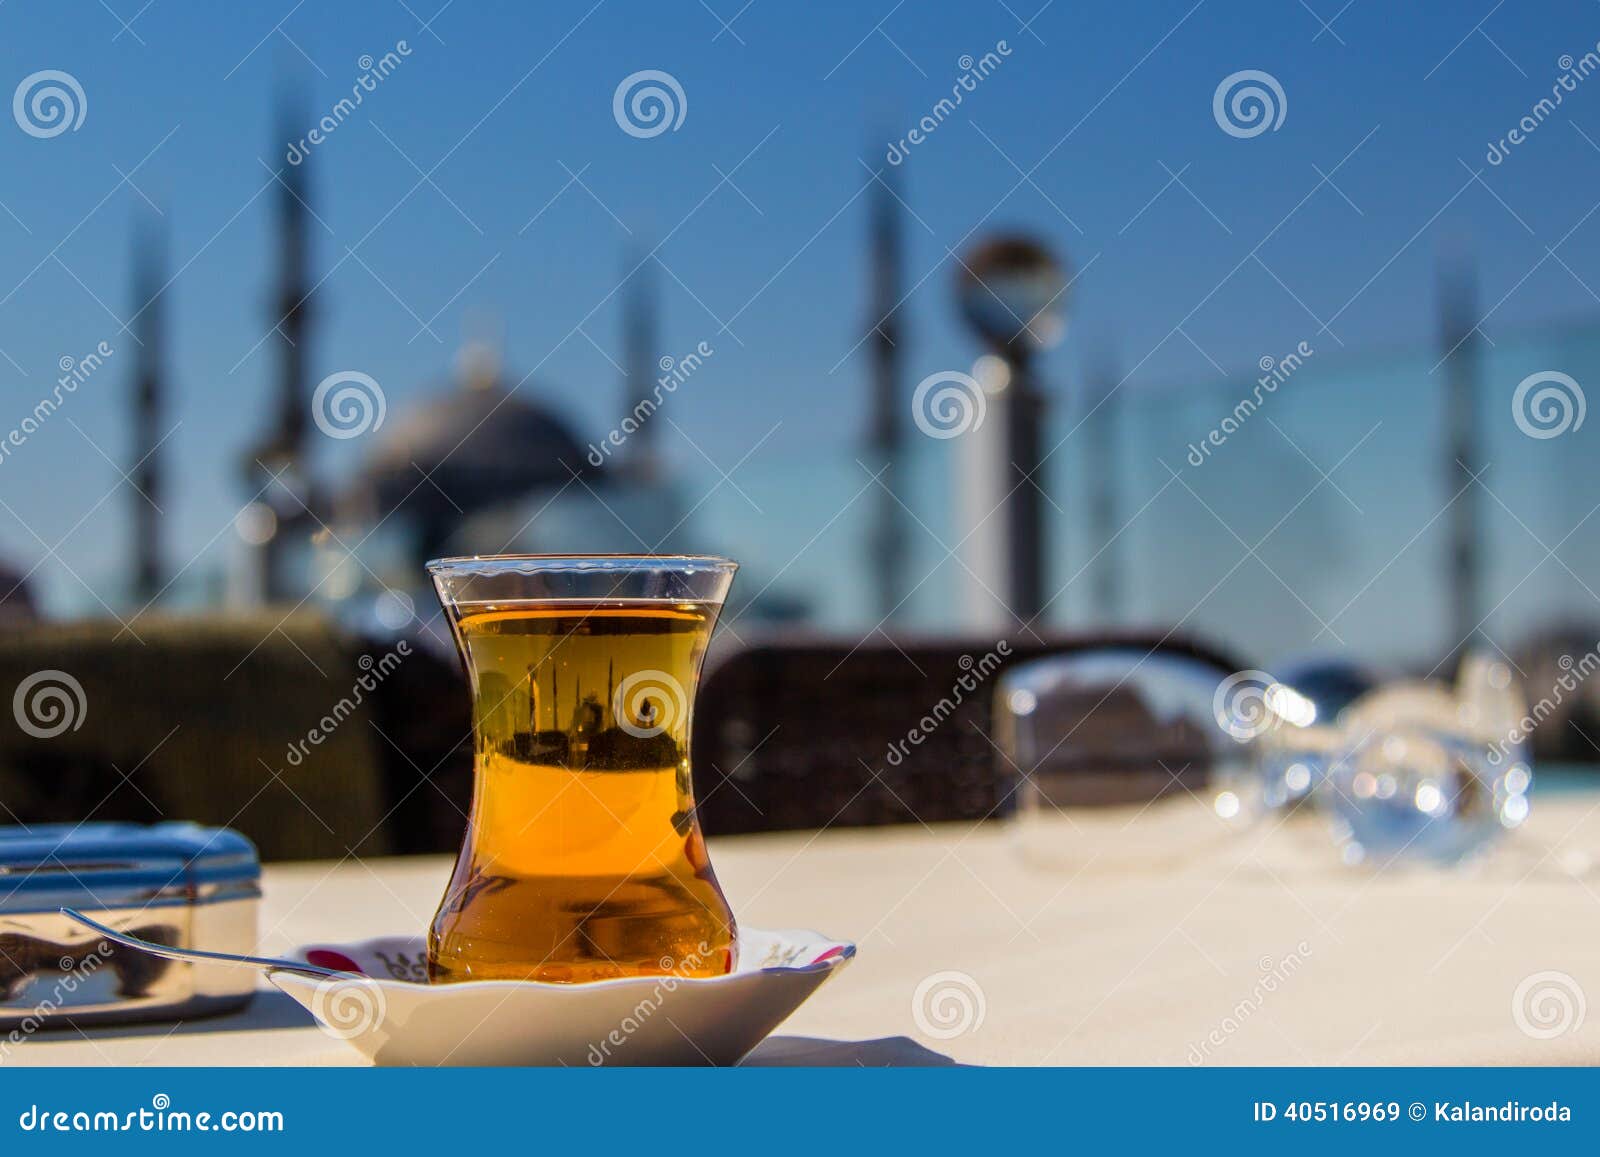 view of the blue mosque (sultanahmet camii) through a traditional turkish tea glass, istanbul, turkey